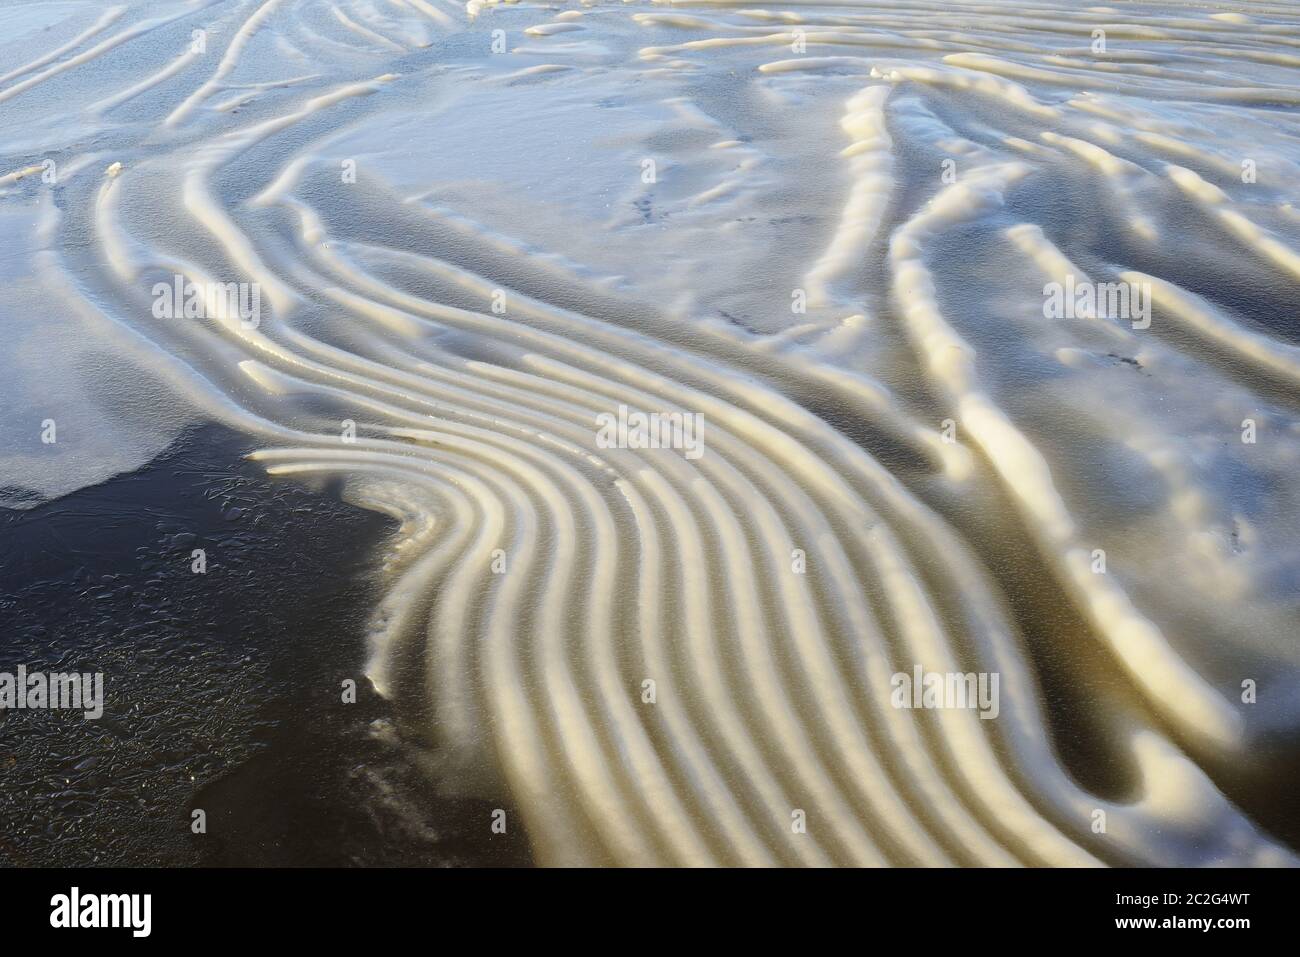 wrinkled ice on the surface of the lake in Finland, an interesting natural phenomenon Stock Photo